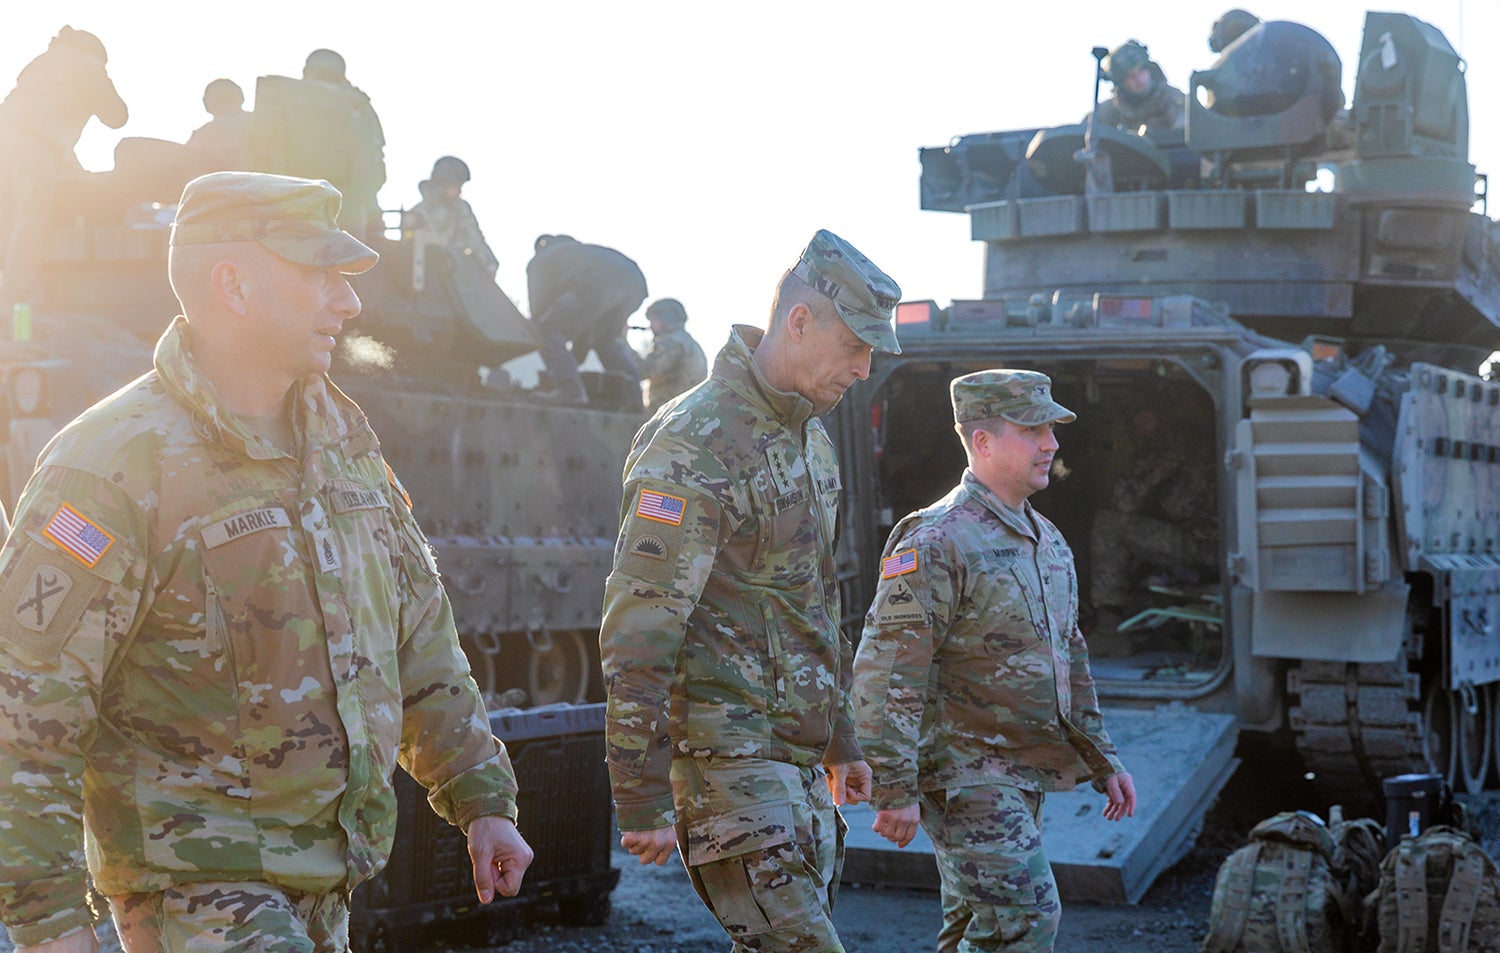 Command Sgt. Maj. Daniel Markle, left, and Col. William Murphy, right, leaders of the New York Army National Guard’s Task Force Orion, walk with Gen. Daniel Hokanson, chief of the National Guard Bureau, through a camp in Grafenwoehr, Germany. The task force staffs Joint Multinational Training Group-Ukraine. (Credit: National Guard/Staff Sgt. Jordan Sivayavirojna)